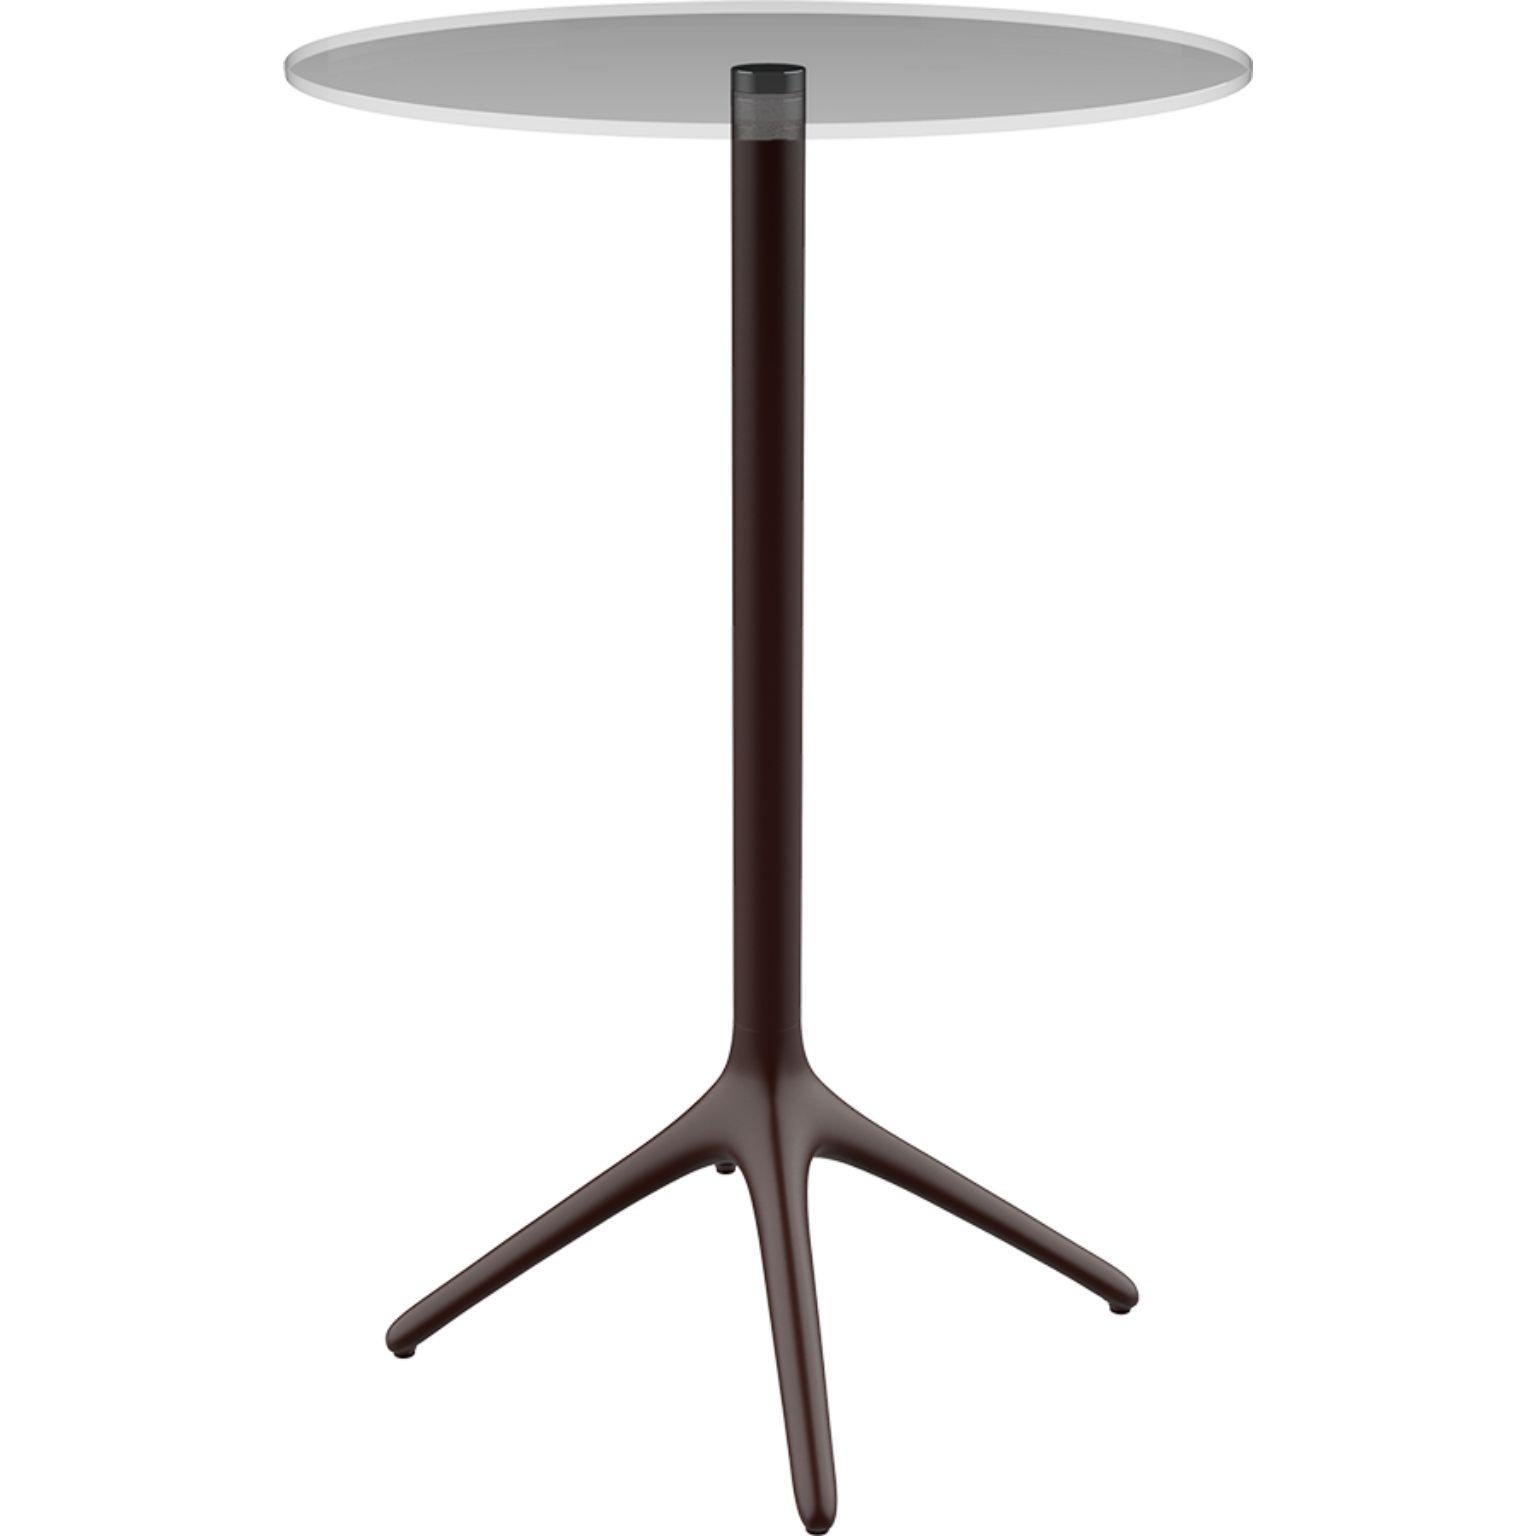 Uni chocolate table 105 by Mowee.
Dimensions: D45.5 x H105 cm.
Material: Aluminium, tempered glass.
Weight: 6.2 kg.
Also Available in different colours and finishes.Collapsable version available. 

A table designed to be as versatile as